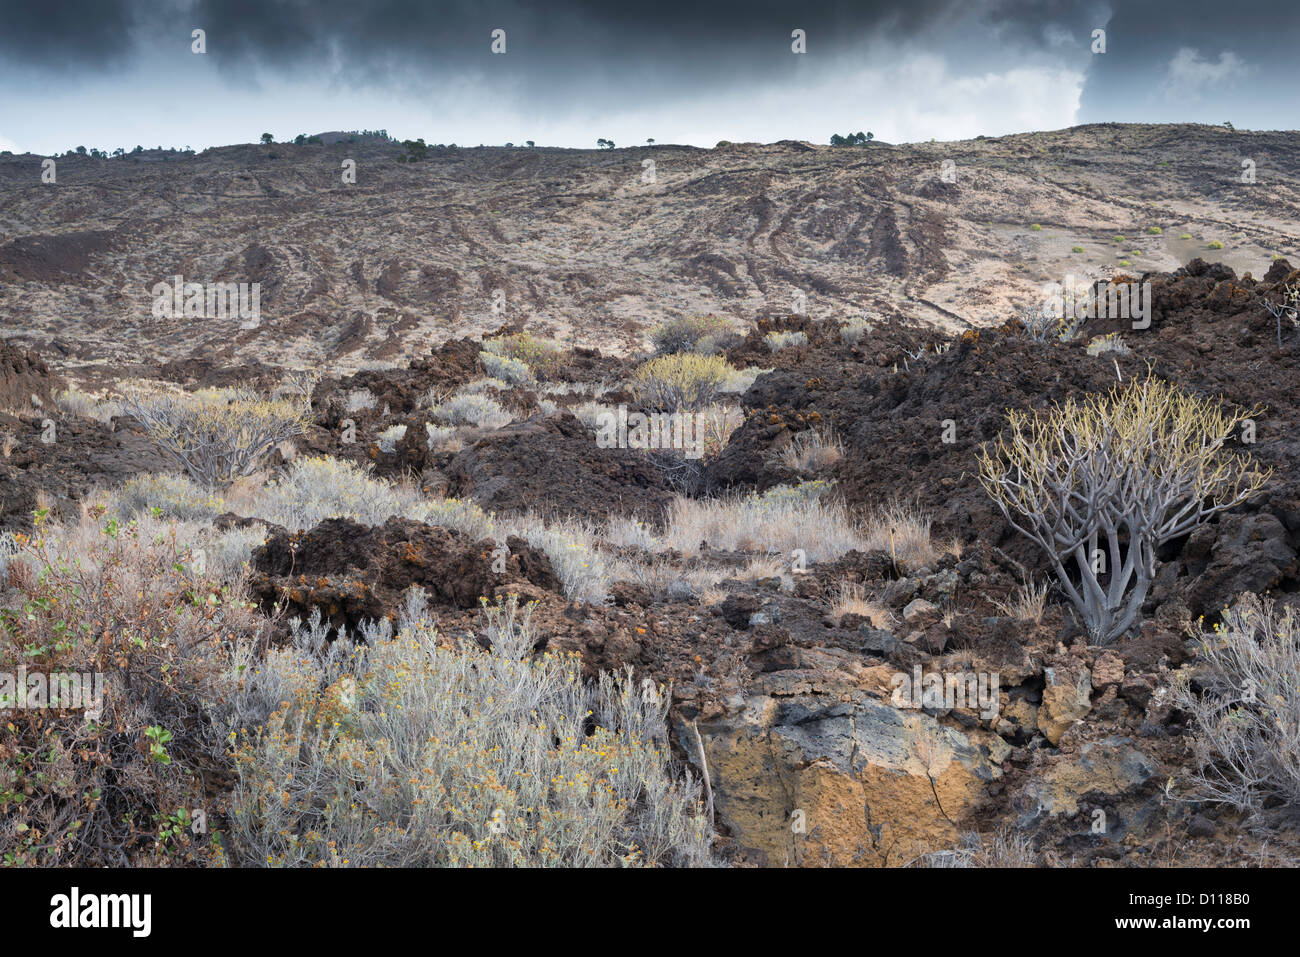 The collapse embayment of El Julan, covered by numerous later lava flows, Tacoron, El Hierro, Canary Islands, Spain Stock Photo